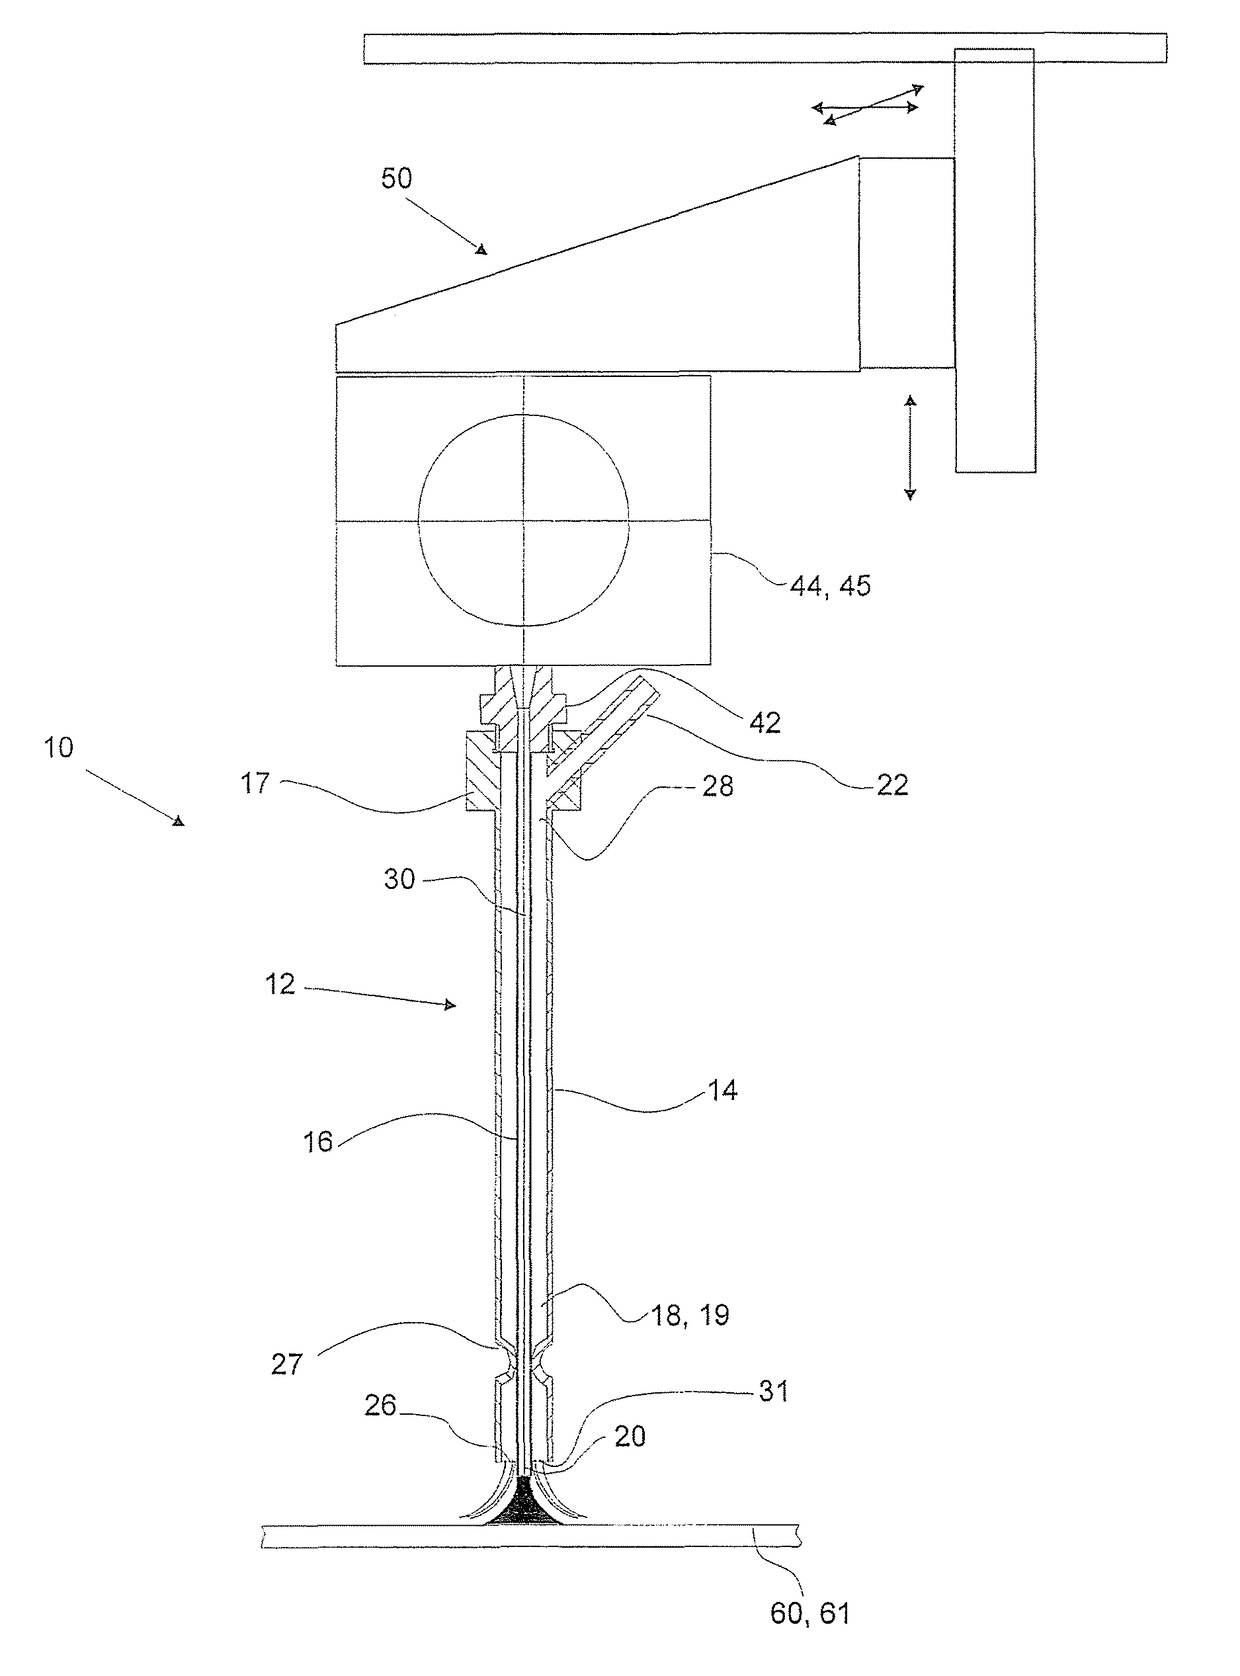 Apparatus for the coating of a substrate